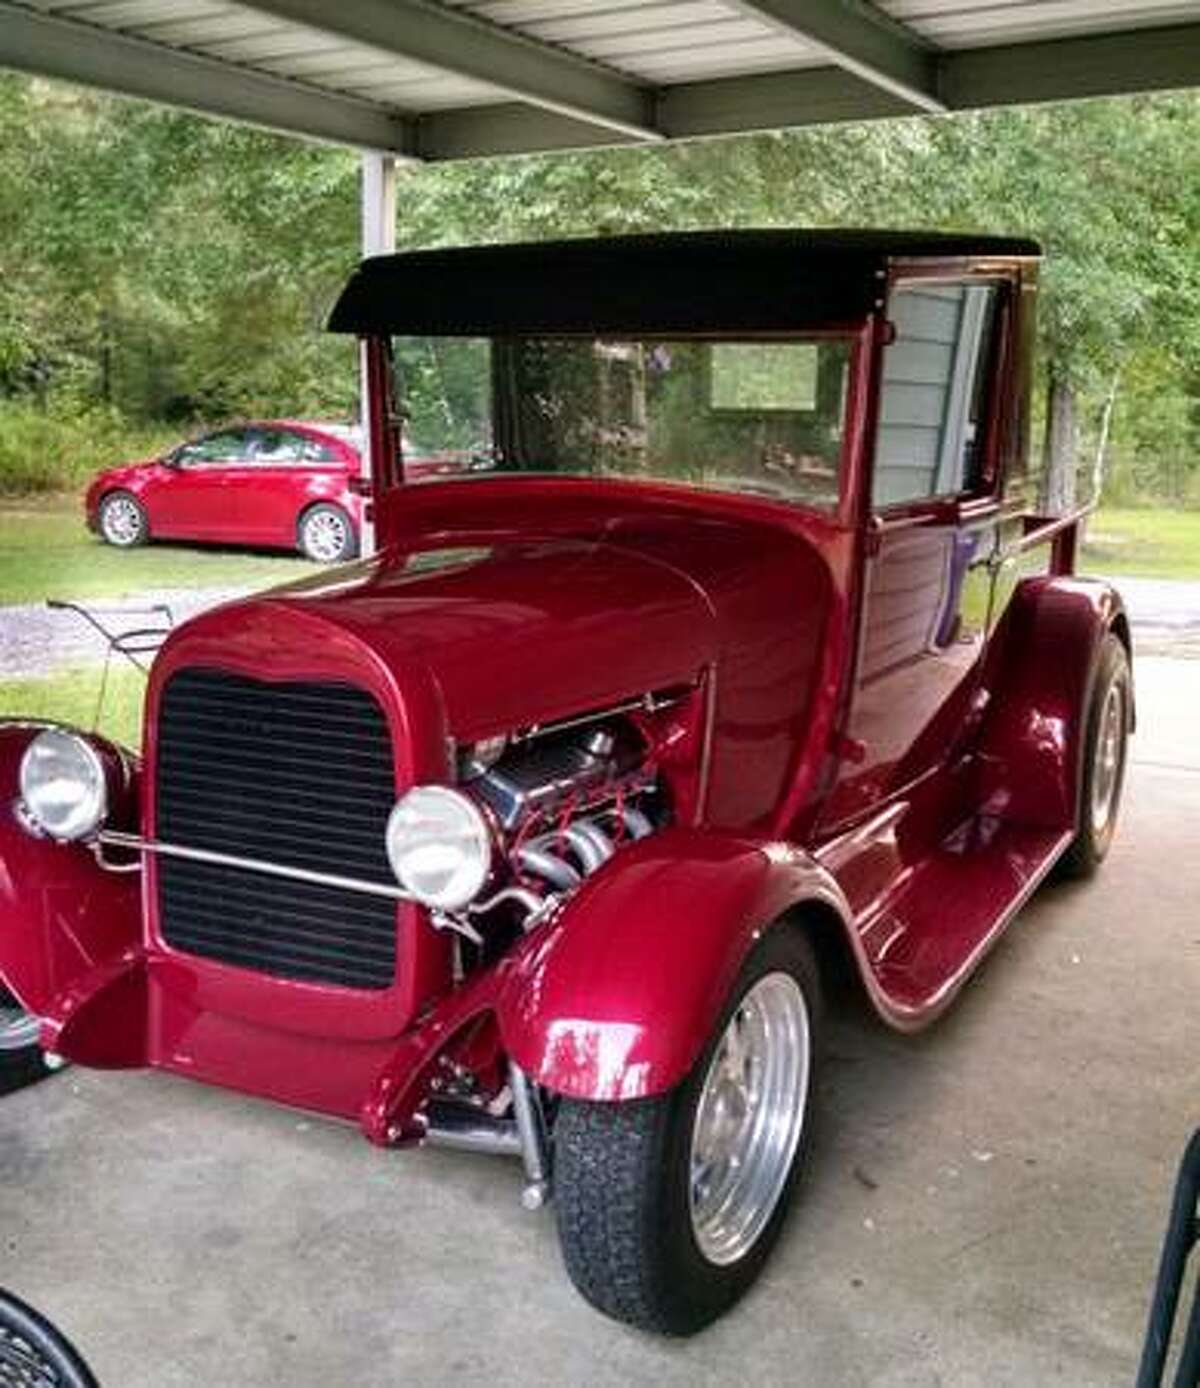 Want a stylish ride from the Calvin Coolidge administration? This 1928 Ford Model A can be yours for $25,000. Mauriceville.